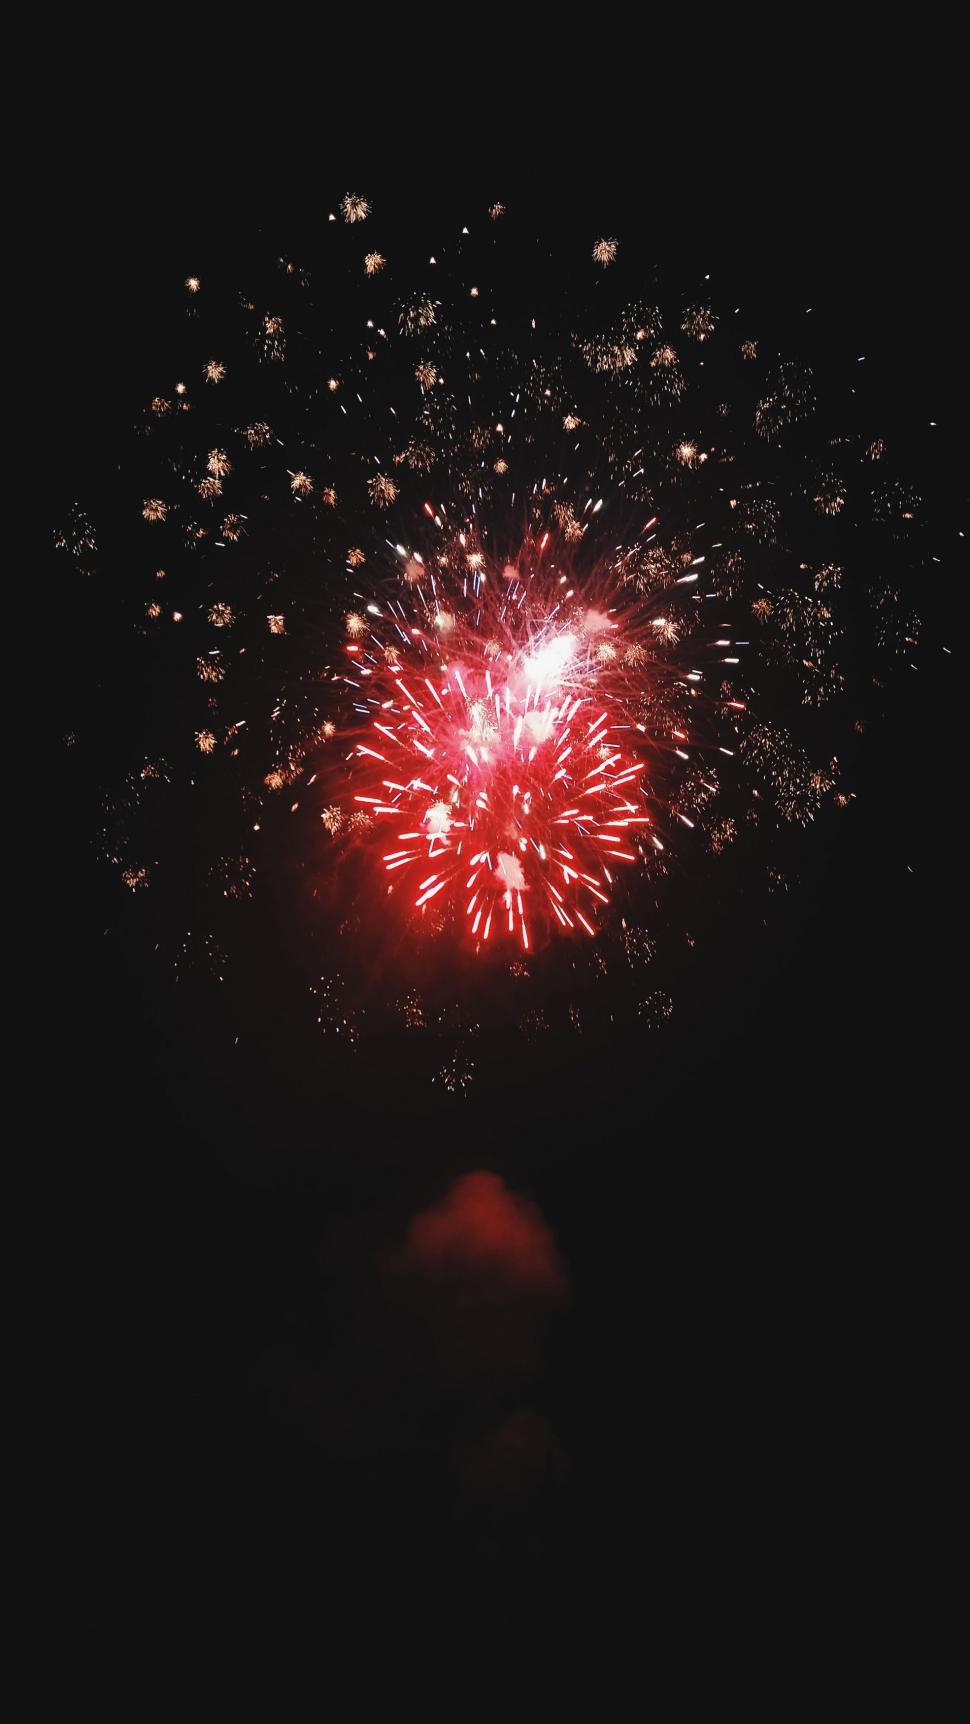 Free Image of Red and White Firework Exploding in the Night Sky 